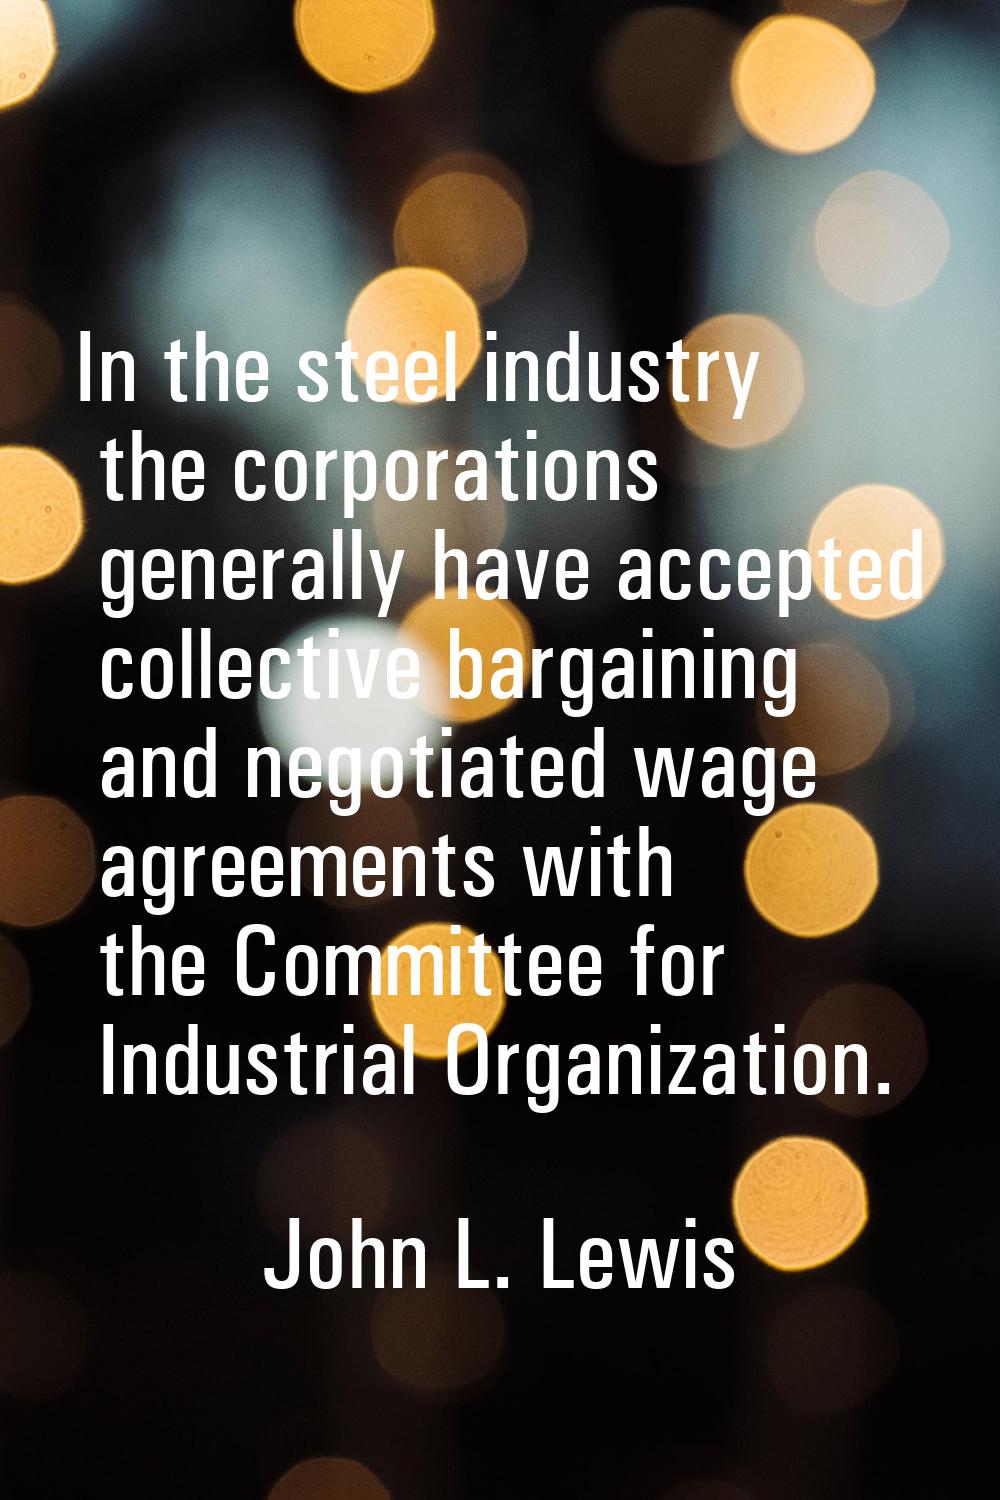 In the steel industry the corporations generally have accepted collective bargaining and negotiated